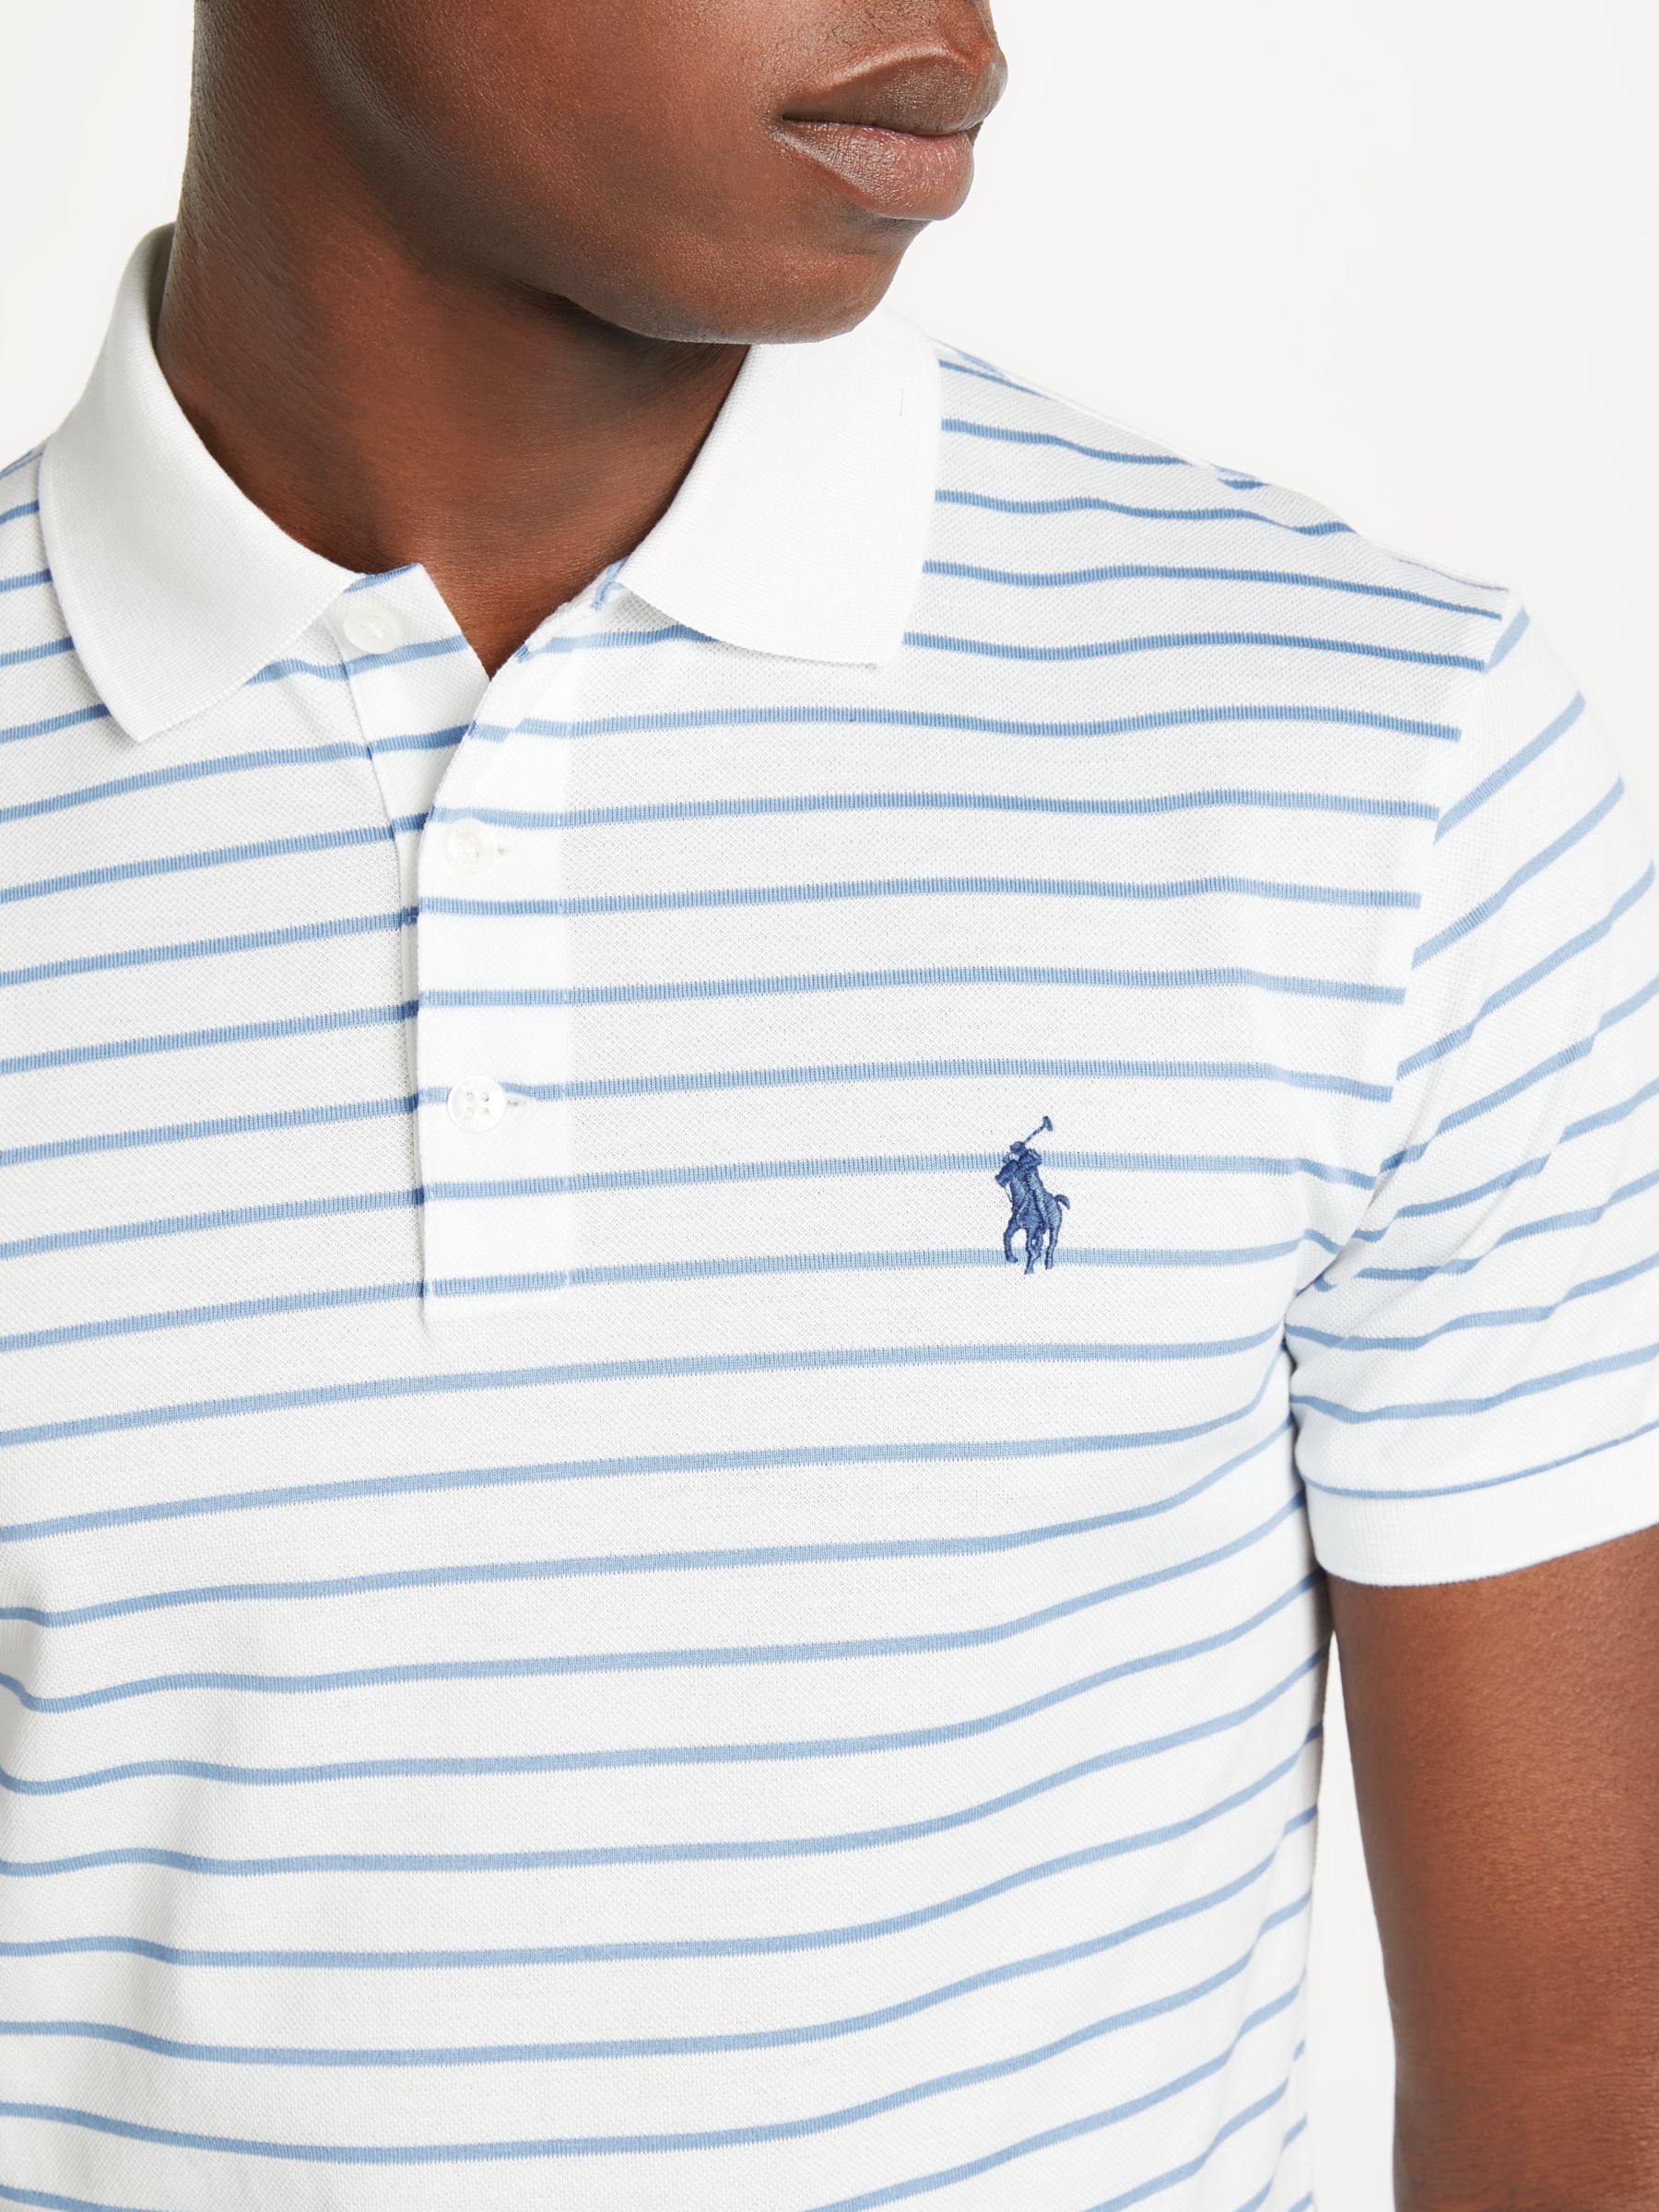 white and blue ralph lauren polo